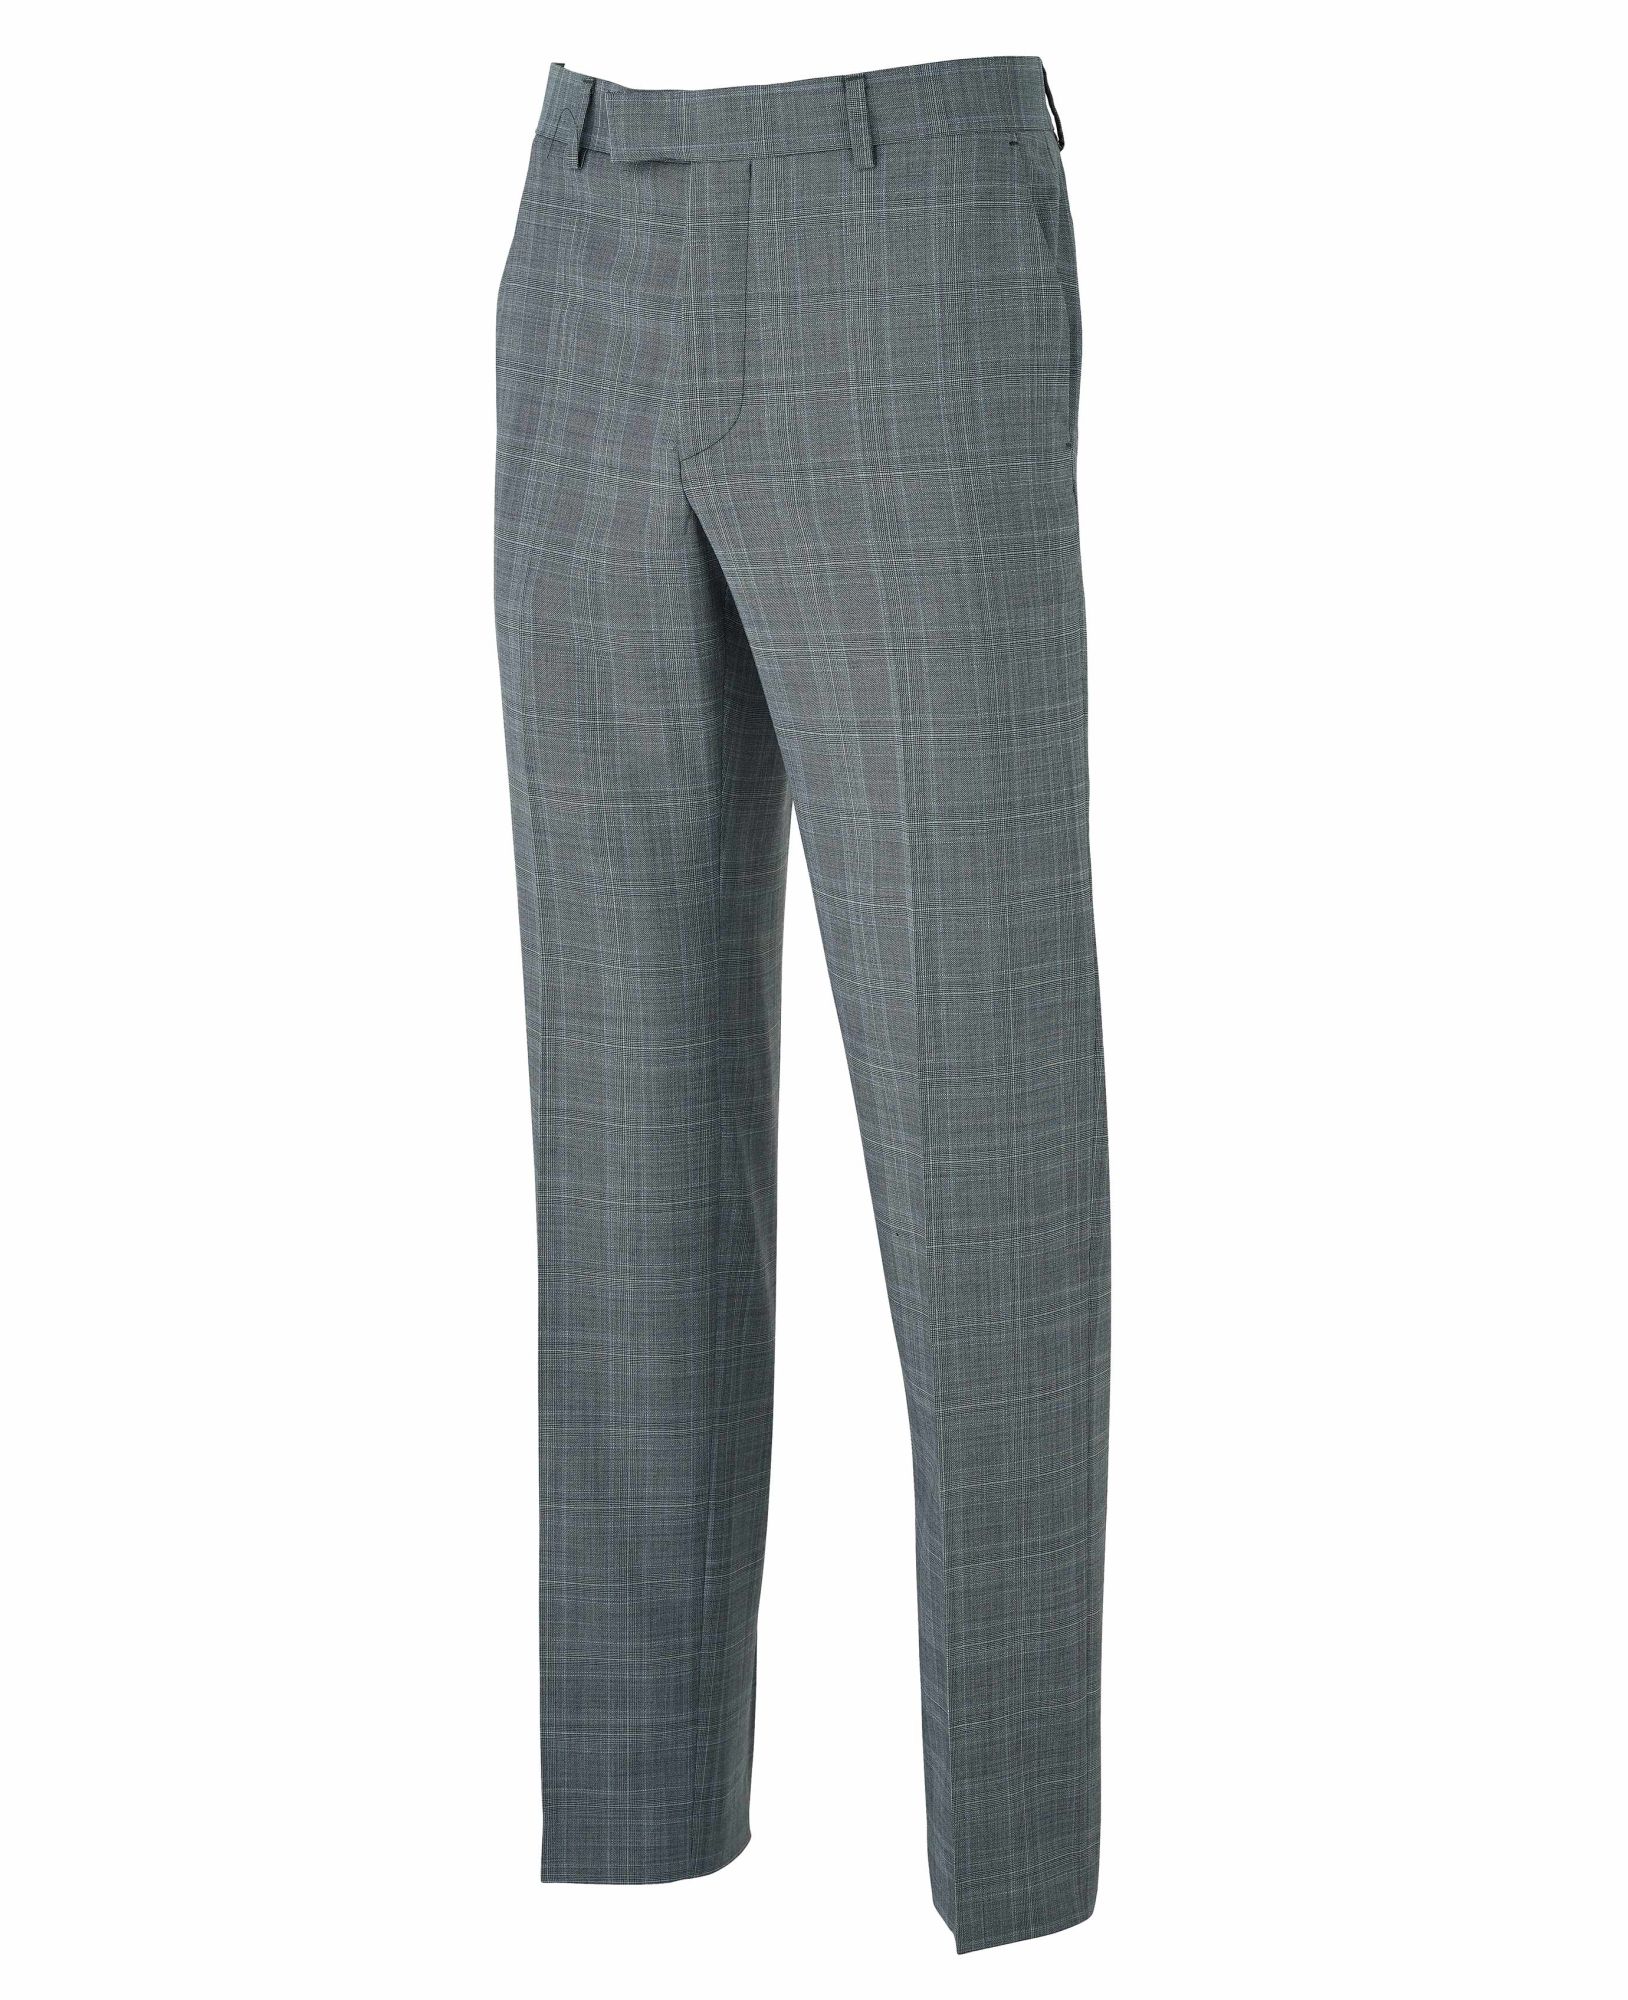 Grey Windowpane Check Tailored Suit Trousers 42